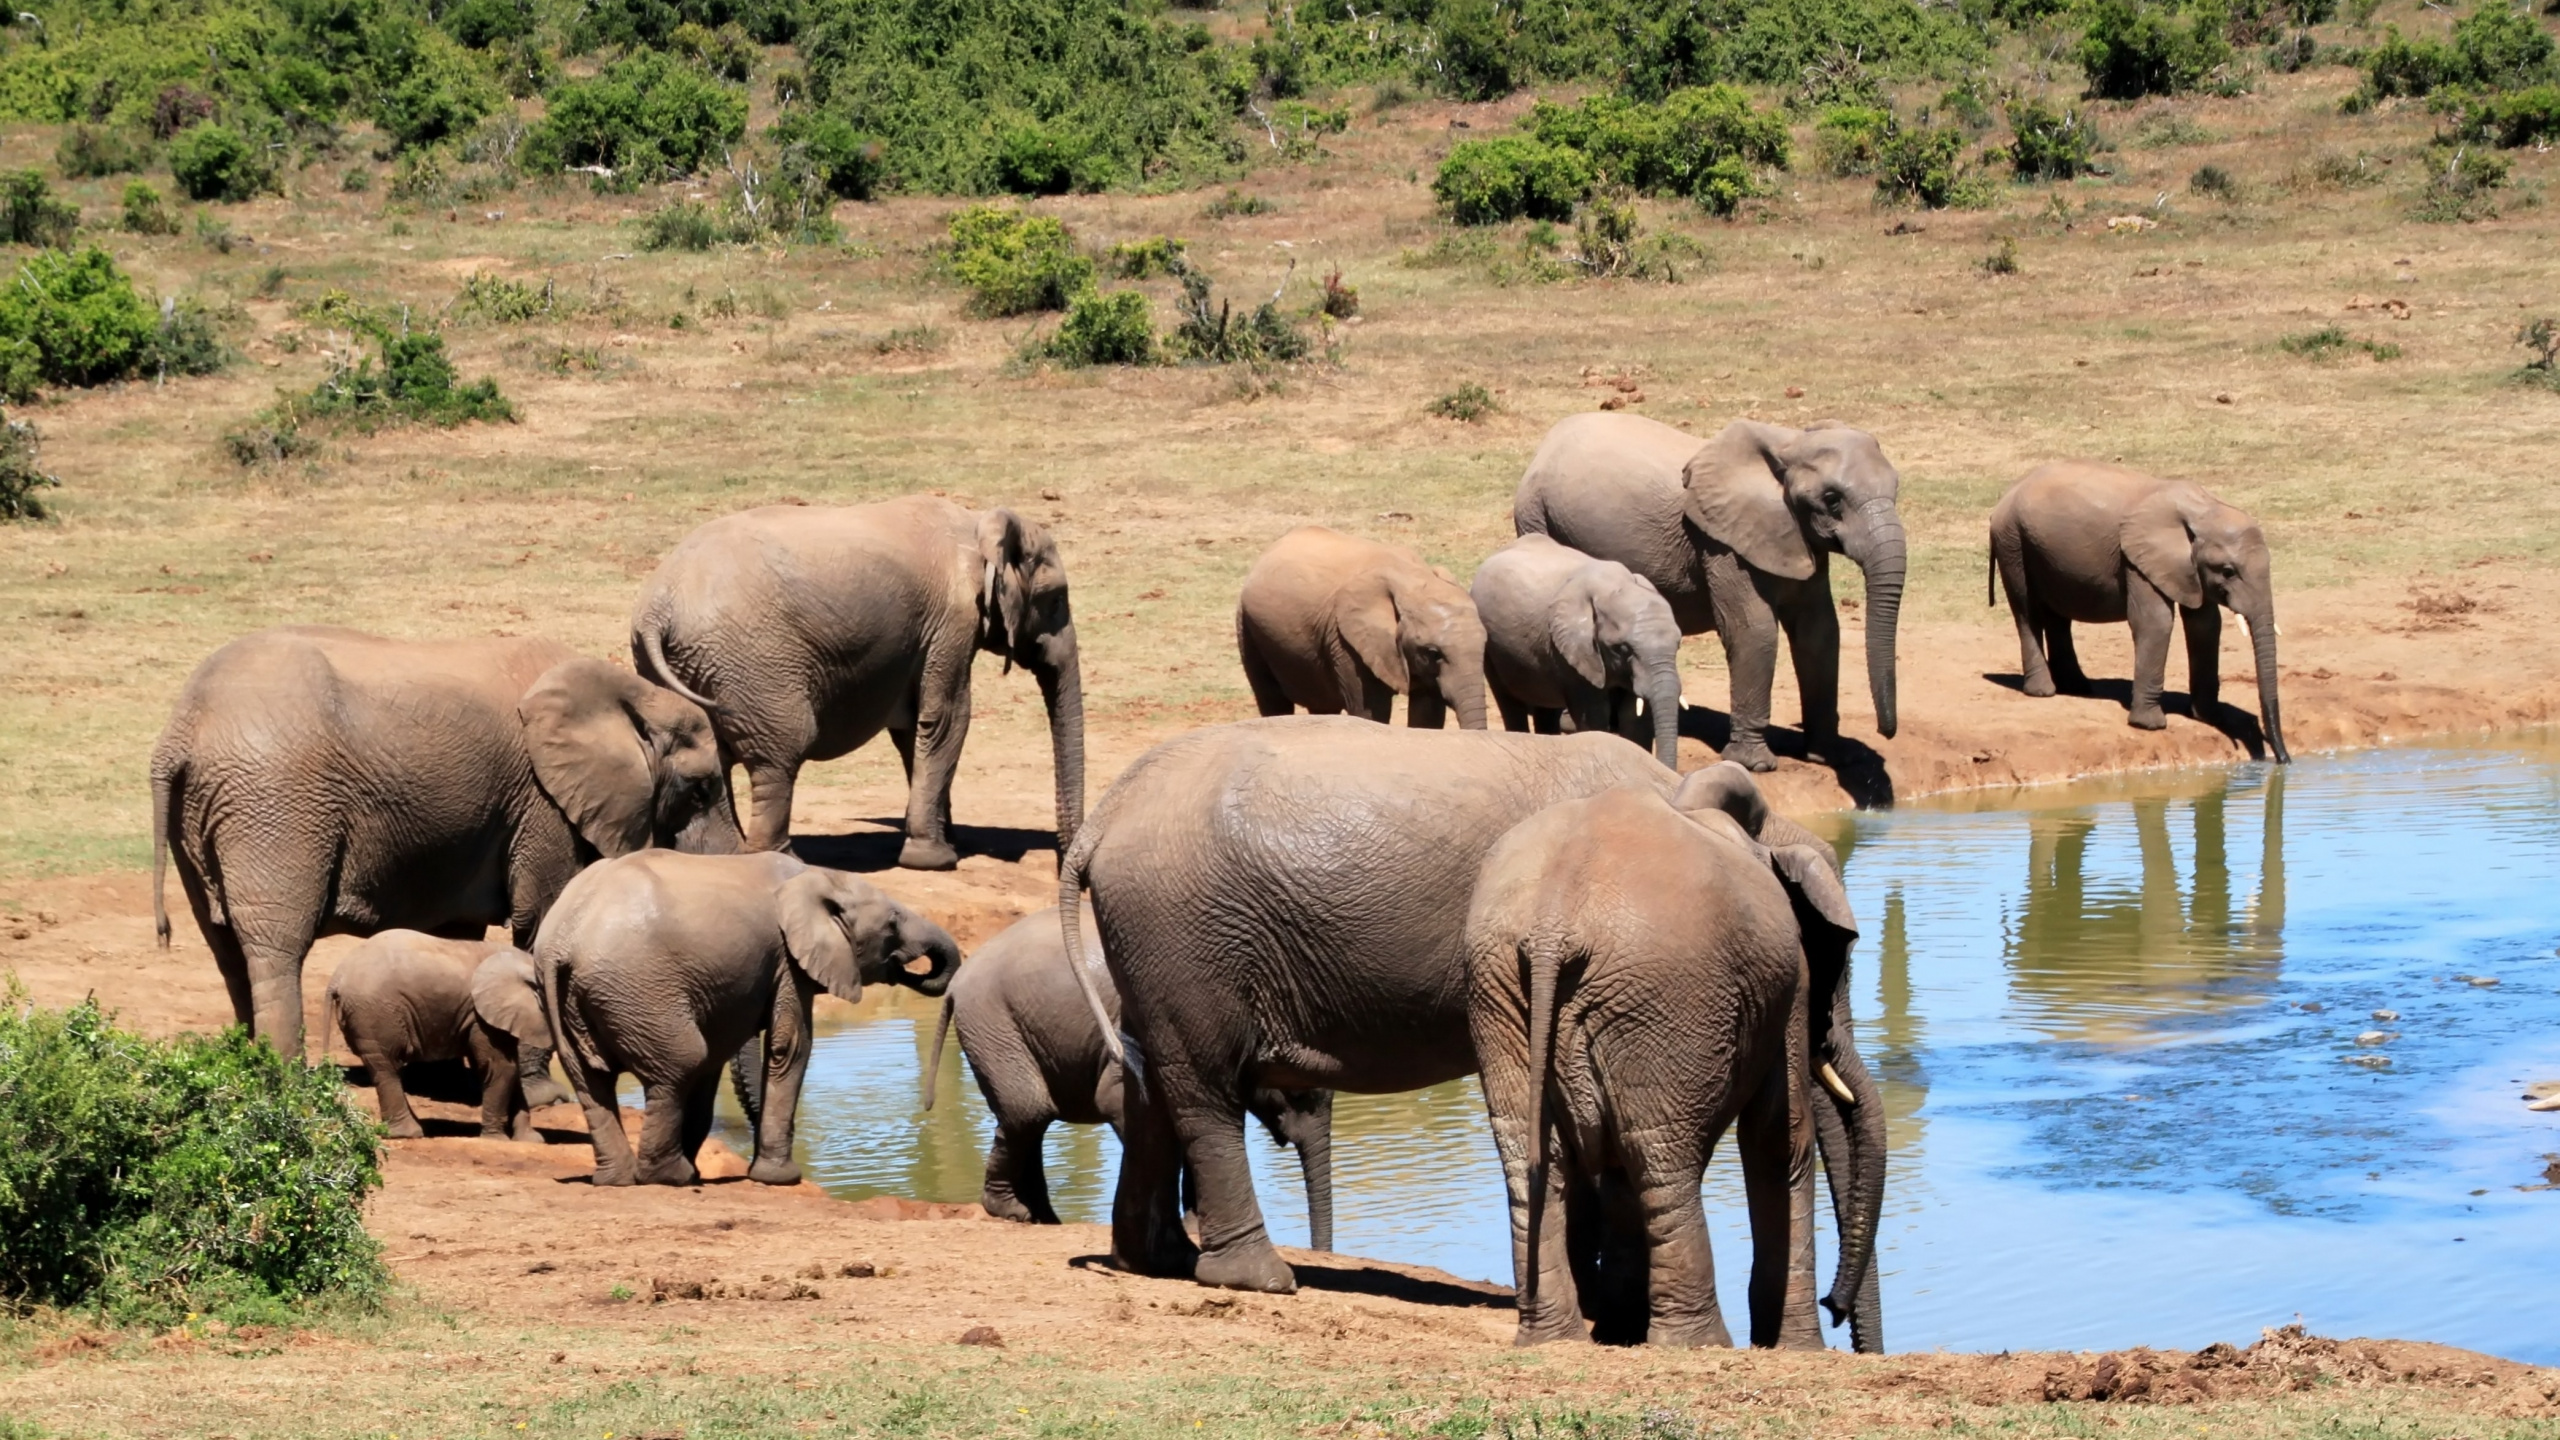 Group of Elephants on Brown Field During Daytime. Wallpaper in 2560x1440 Resolution